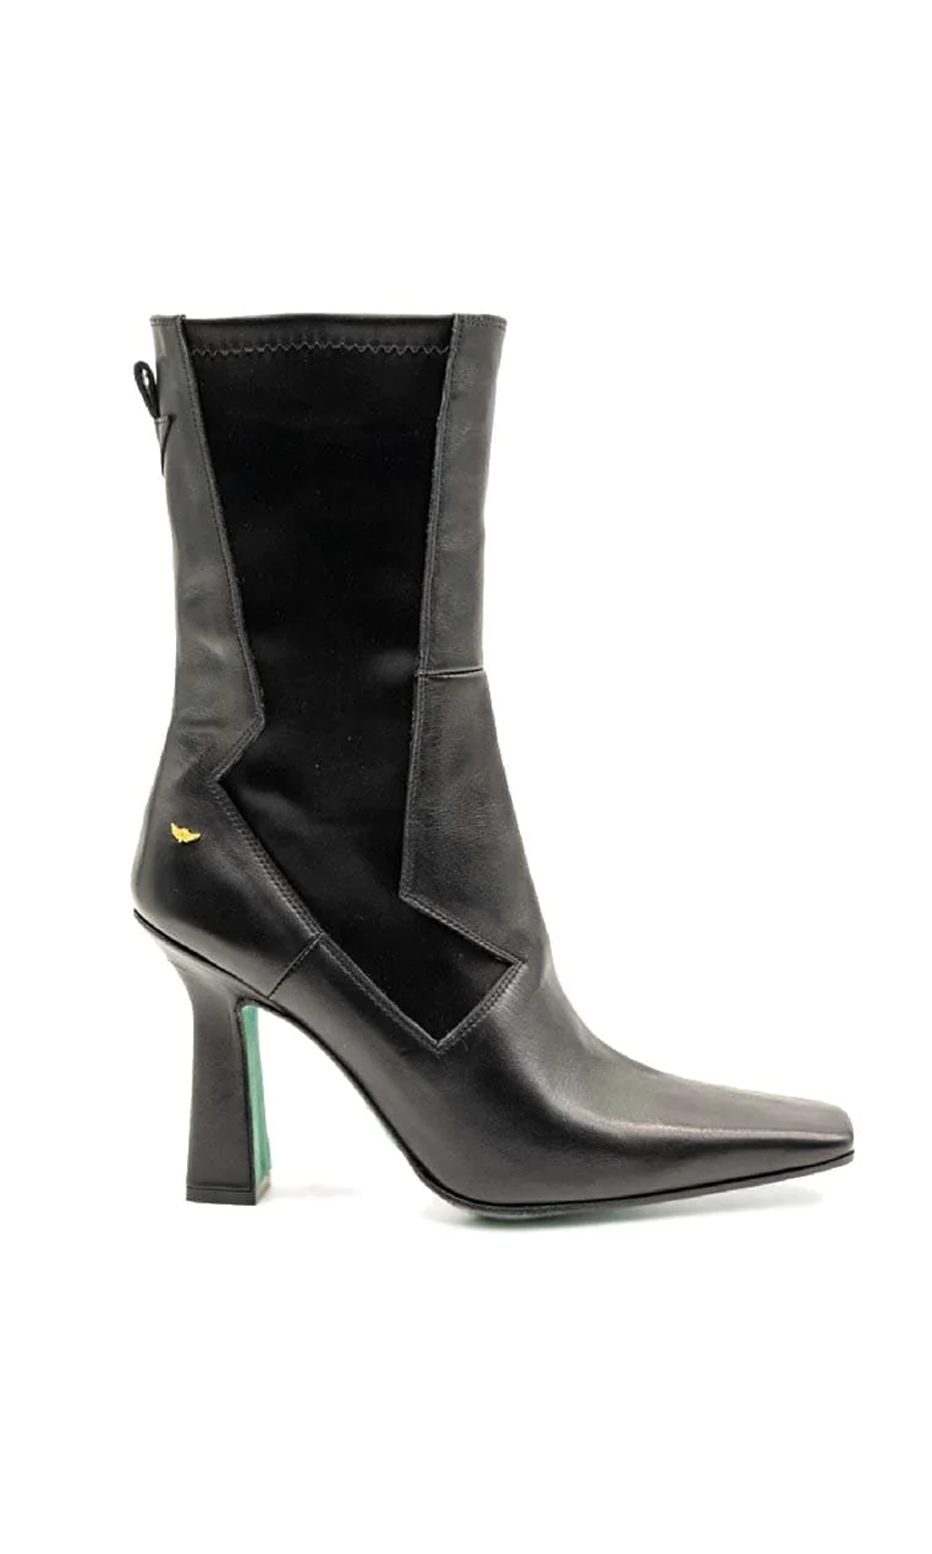 miguel vieira leather mid calf boots